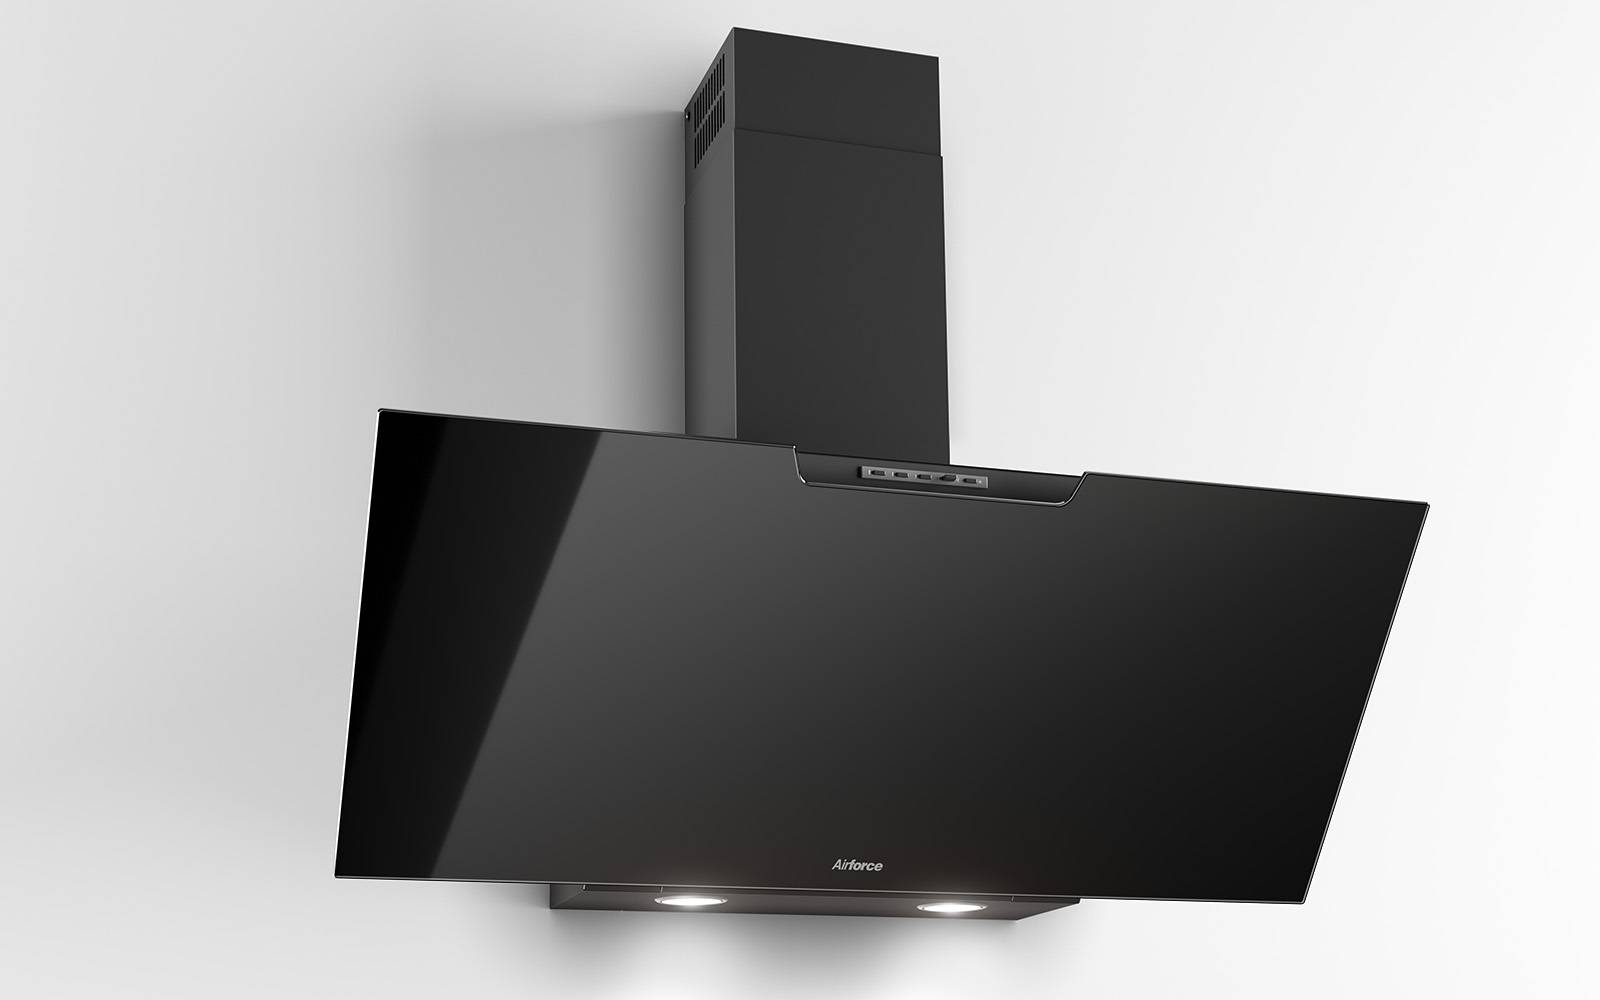 Airforce F212 90cm Wall Mounted Cooker Hood with Soft Push Button Controls- Black Glass Finish